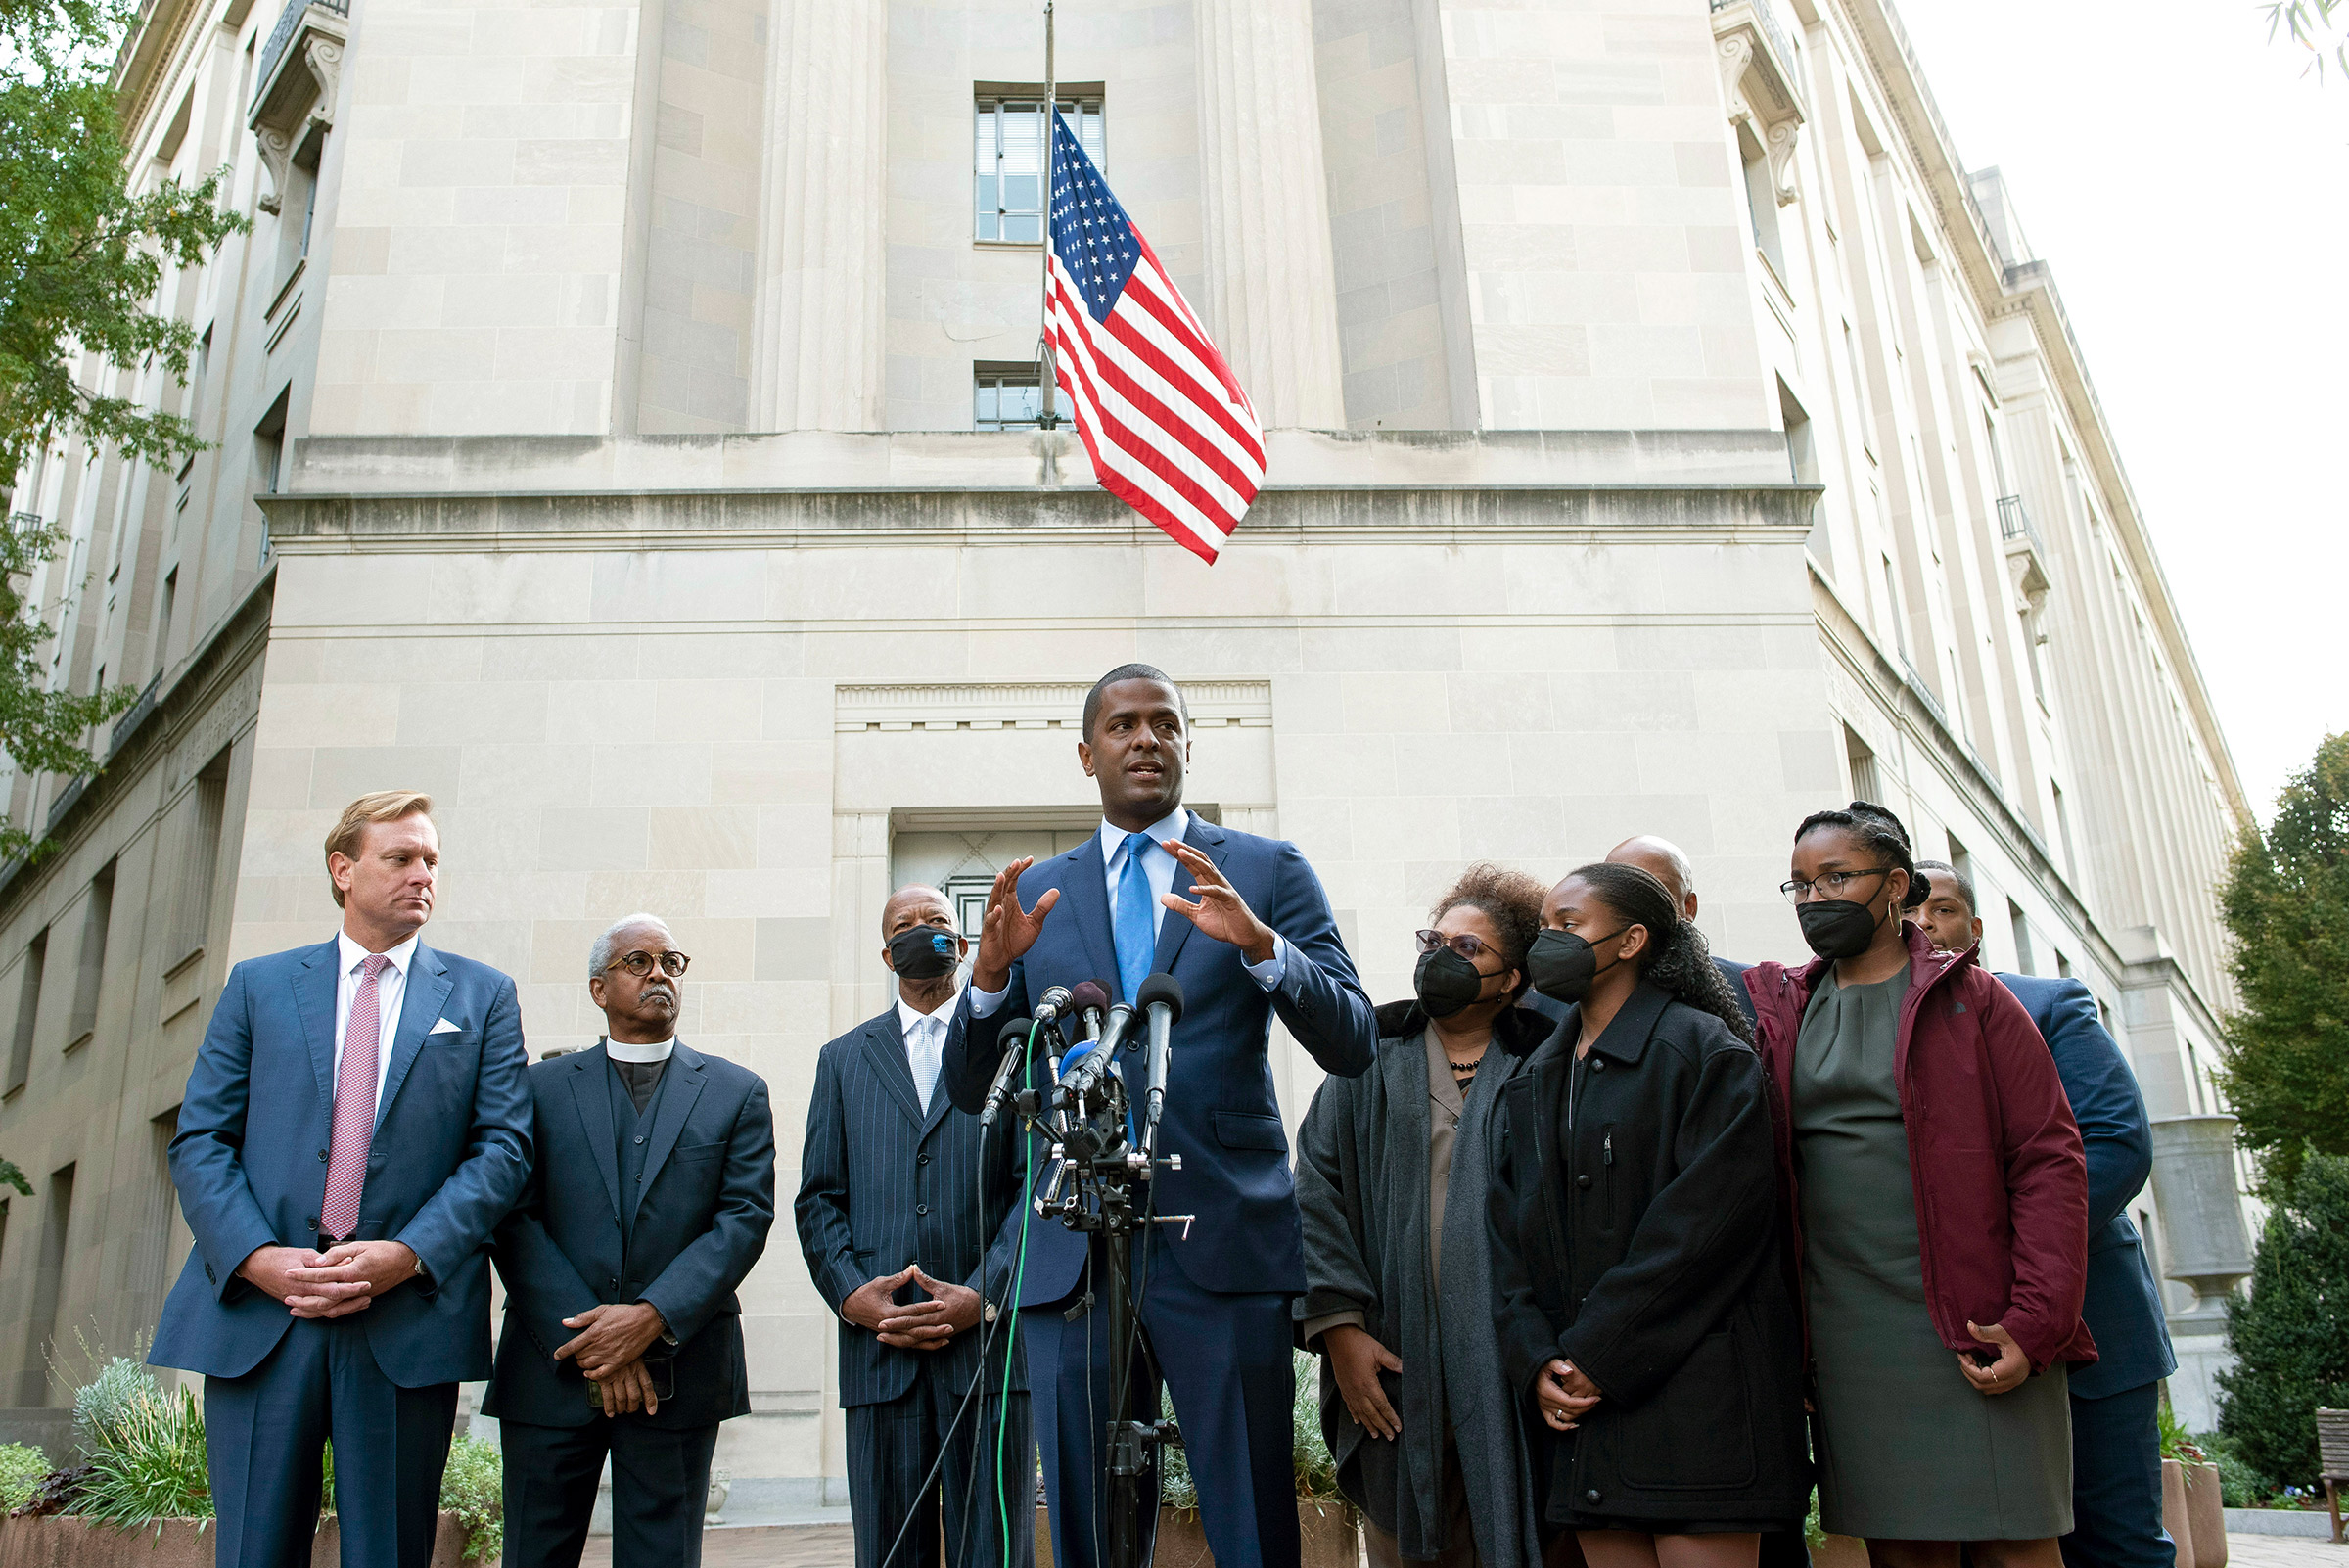 Bakari Sellers, the attorney for the families of victims killed in the 2015 Mother Emanuel AME Church massacre, speaks with reporters outside the Justice Department in Washington on Thursday, Oct. 28, 2021. (Cliff Owen—AP)